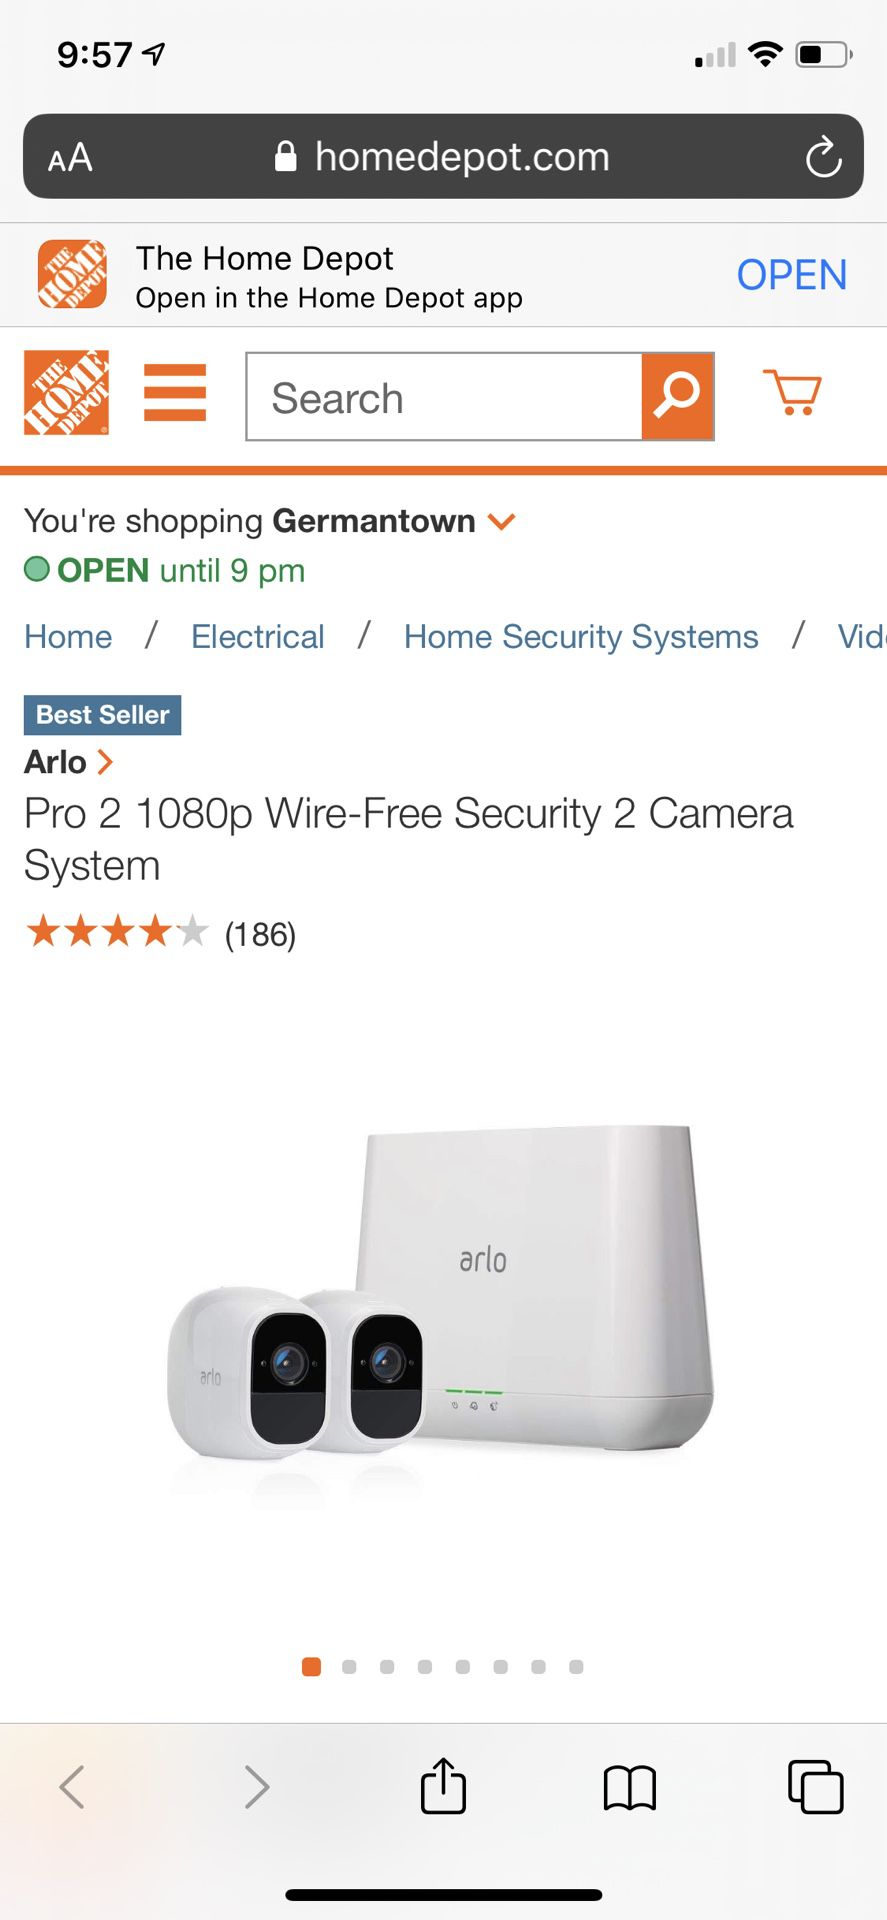 Pro 2 1080p Wire-Free Security 2 Camera System